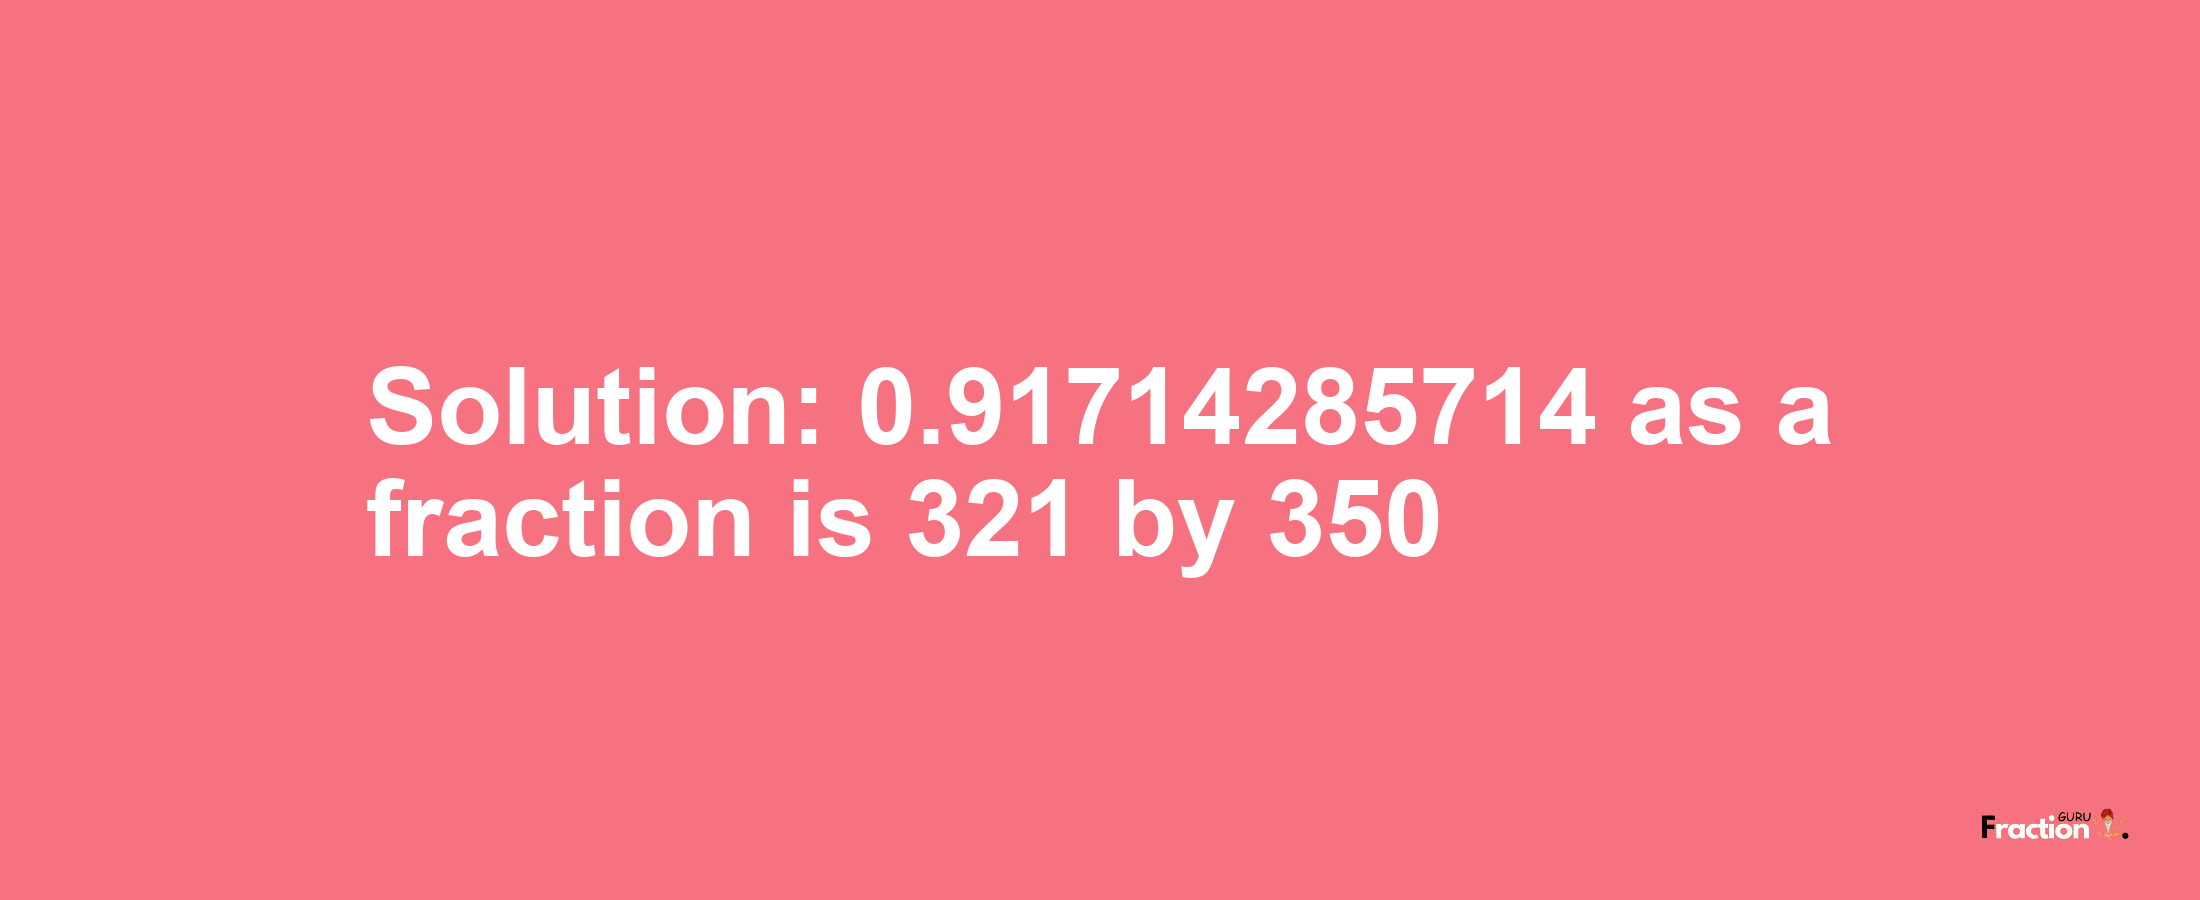 Solution:0.91714285714 as a fraction is 321/350